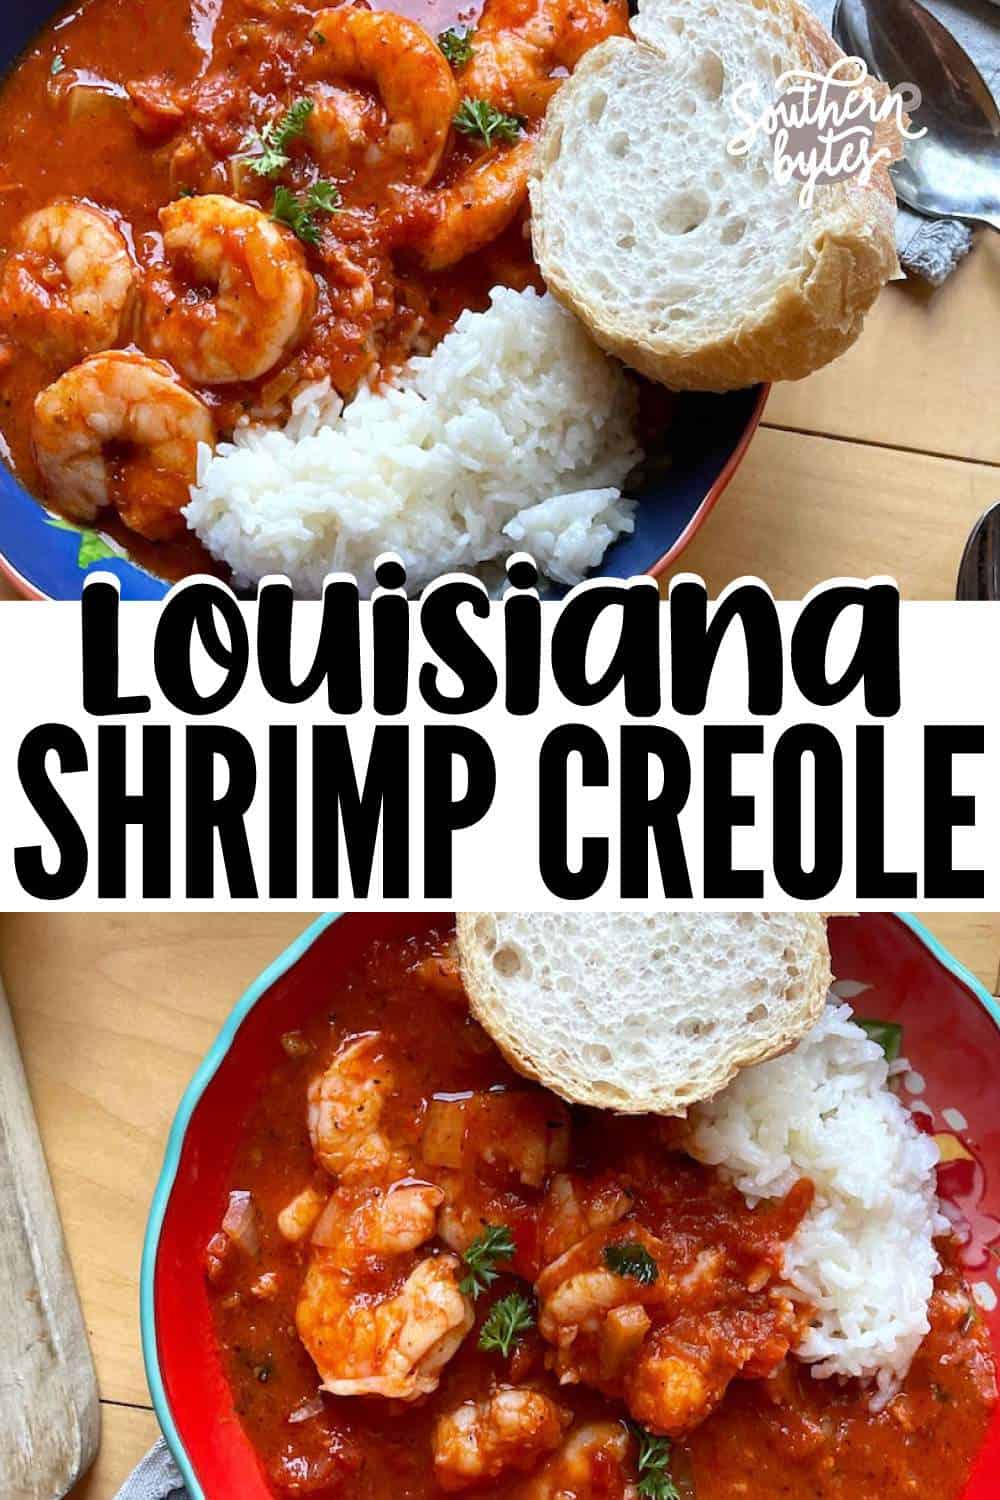 A pin image of two bowls of shrimp creole with white rice, french bread, and overlay text.